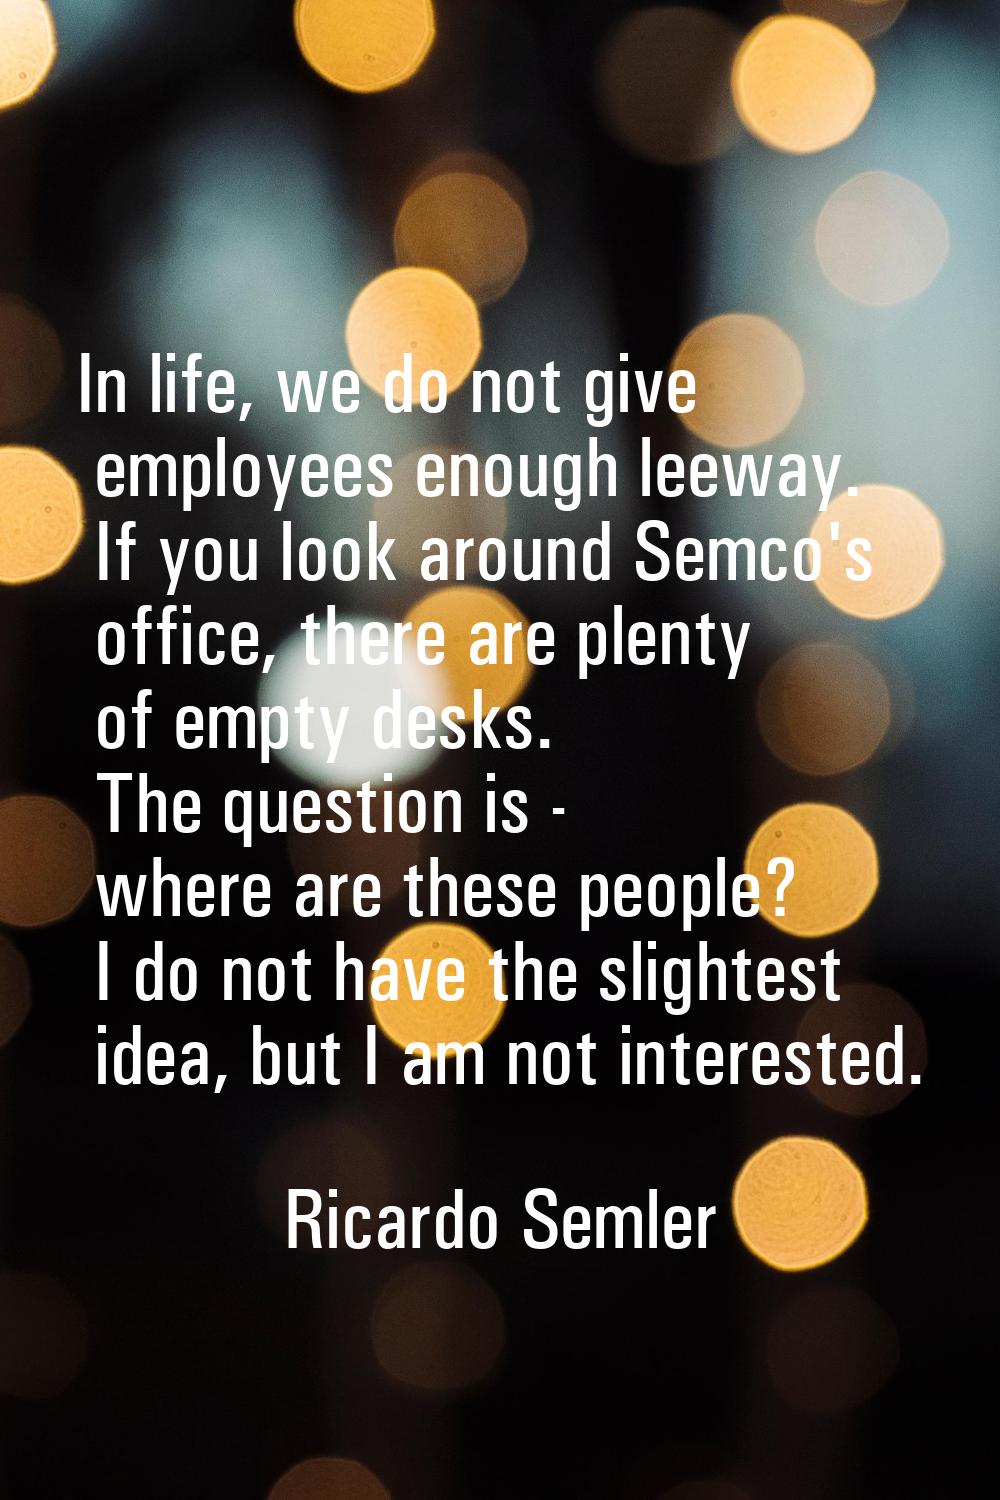 In life, we do not give employees enough leeway. If you look around Semco's office, there are plent